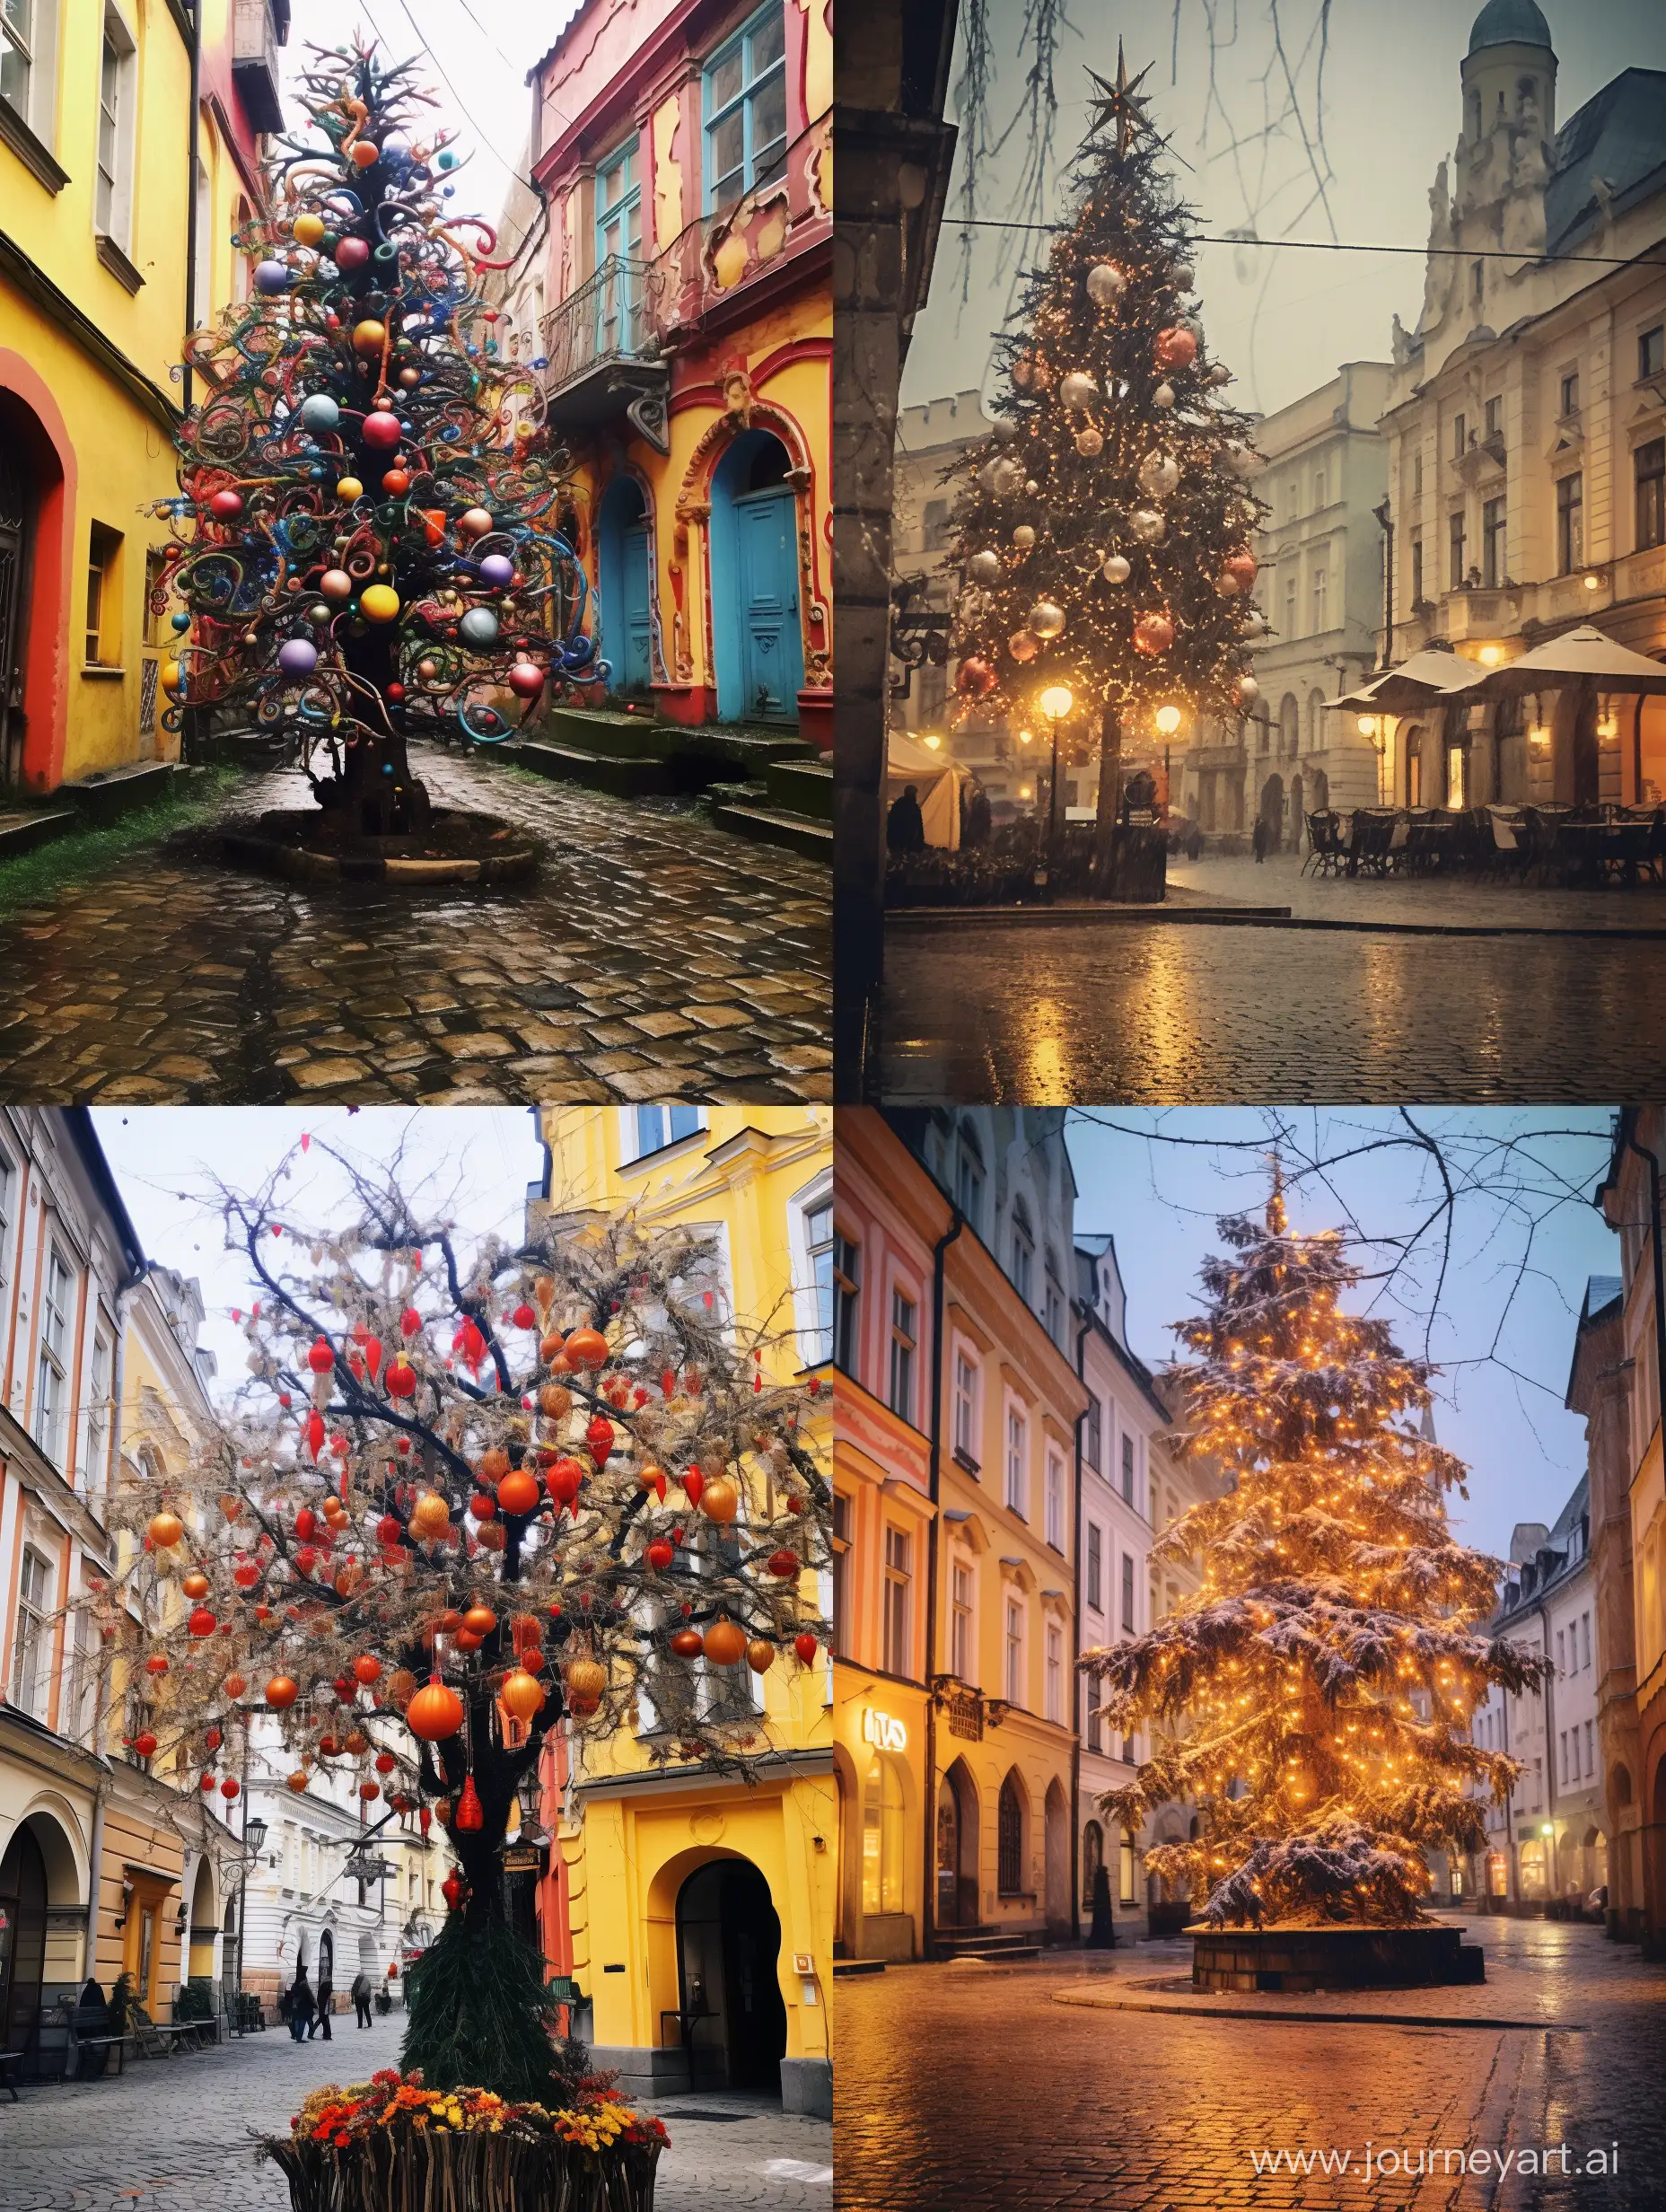 Charming-New-Years-Tree-Adorns-Quaint-Old-Townscape